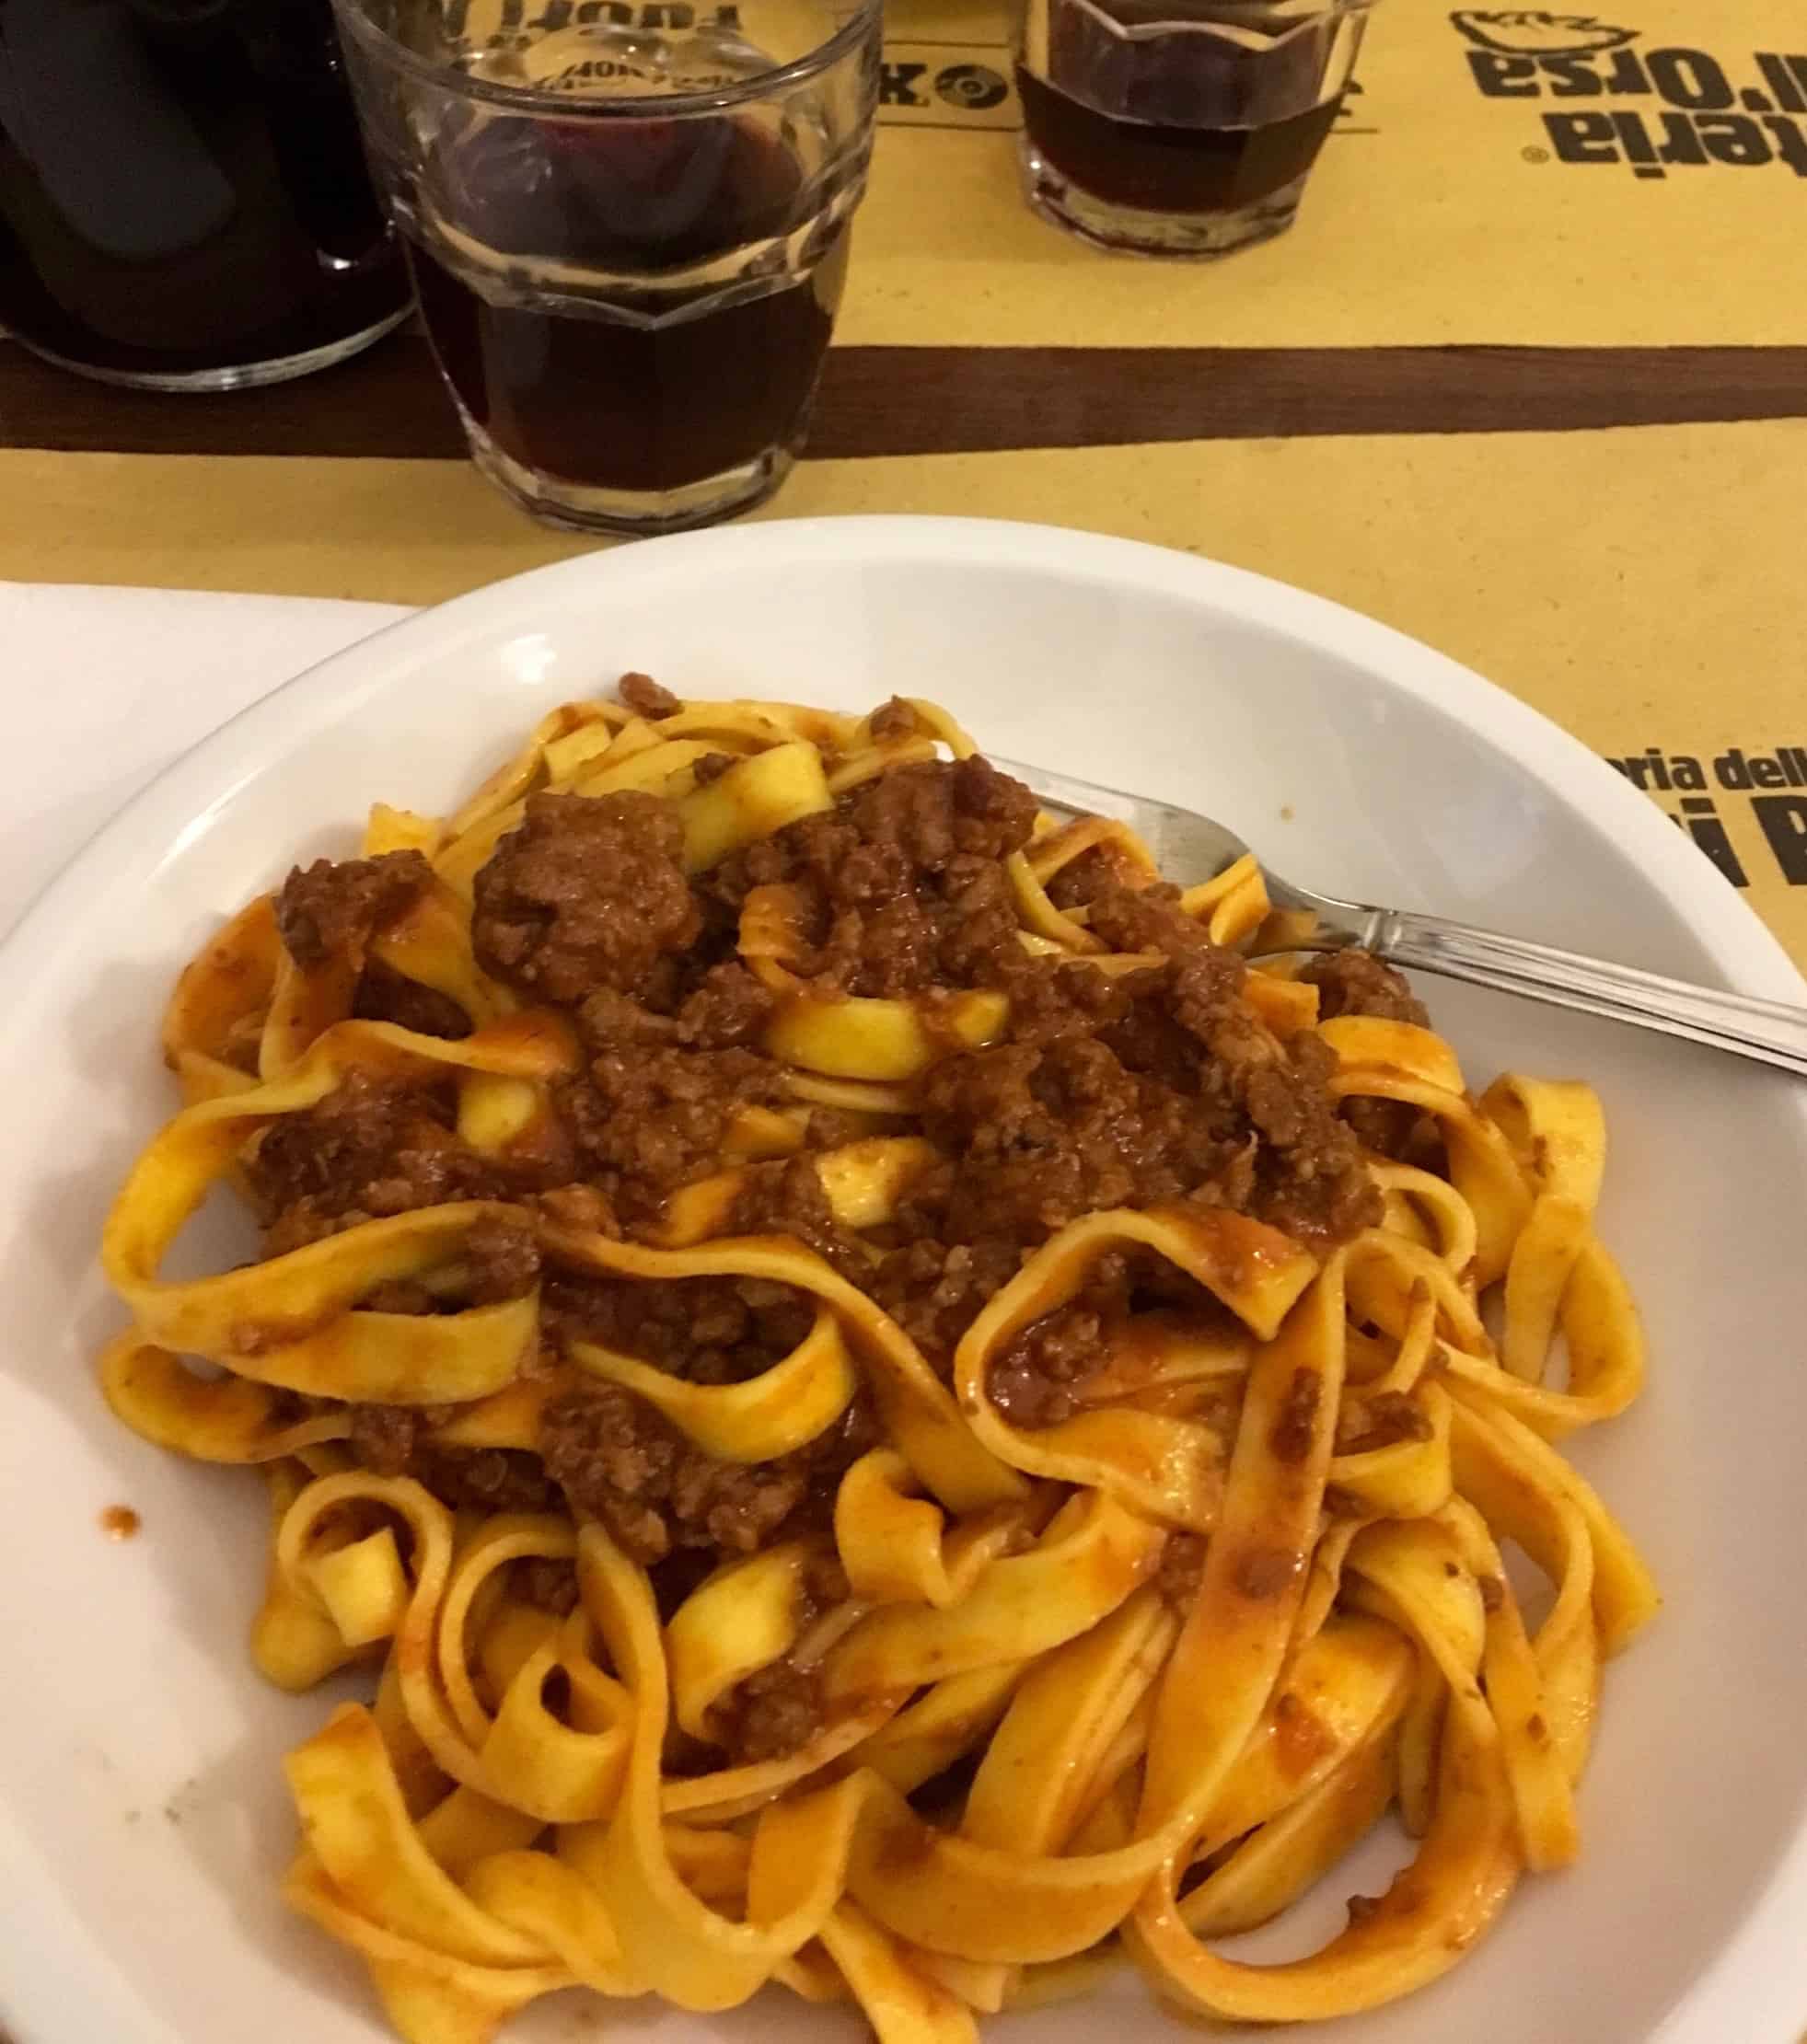 Authentic bolognese at Osteria dell'Orsa in Bologna